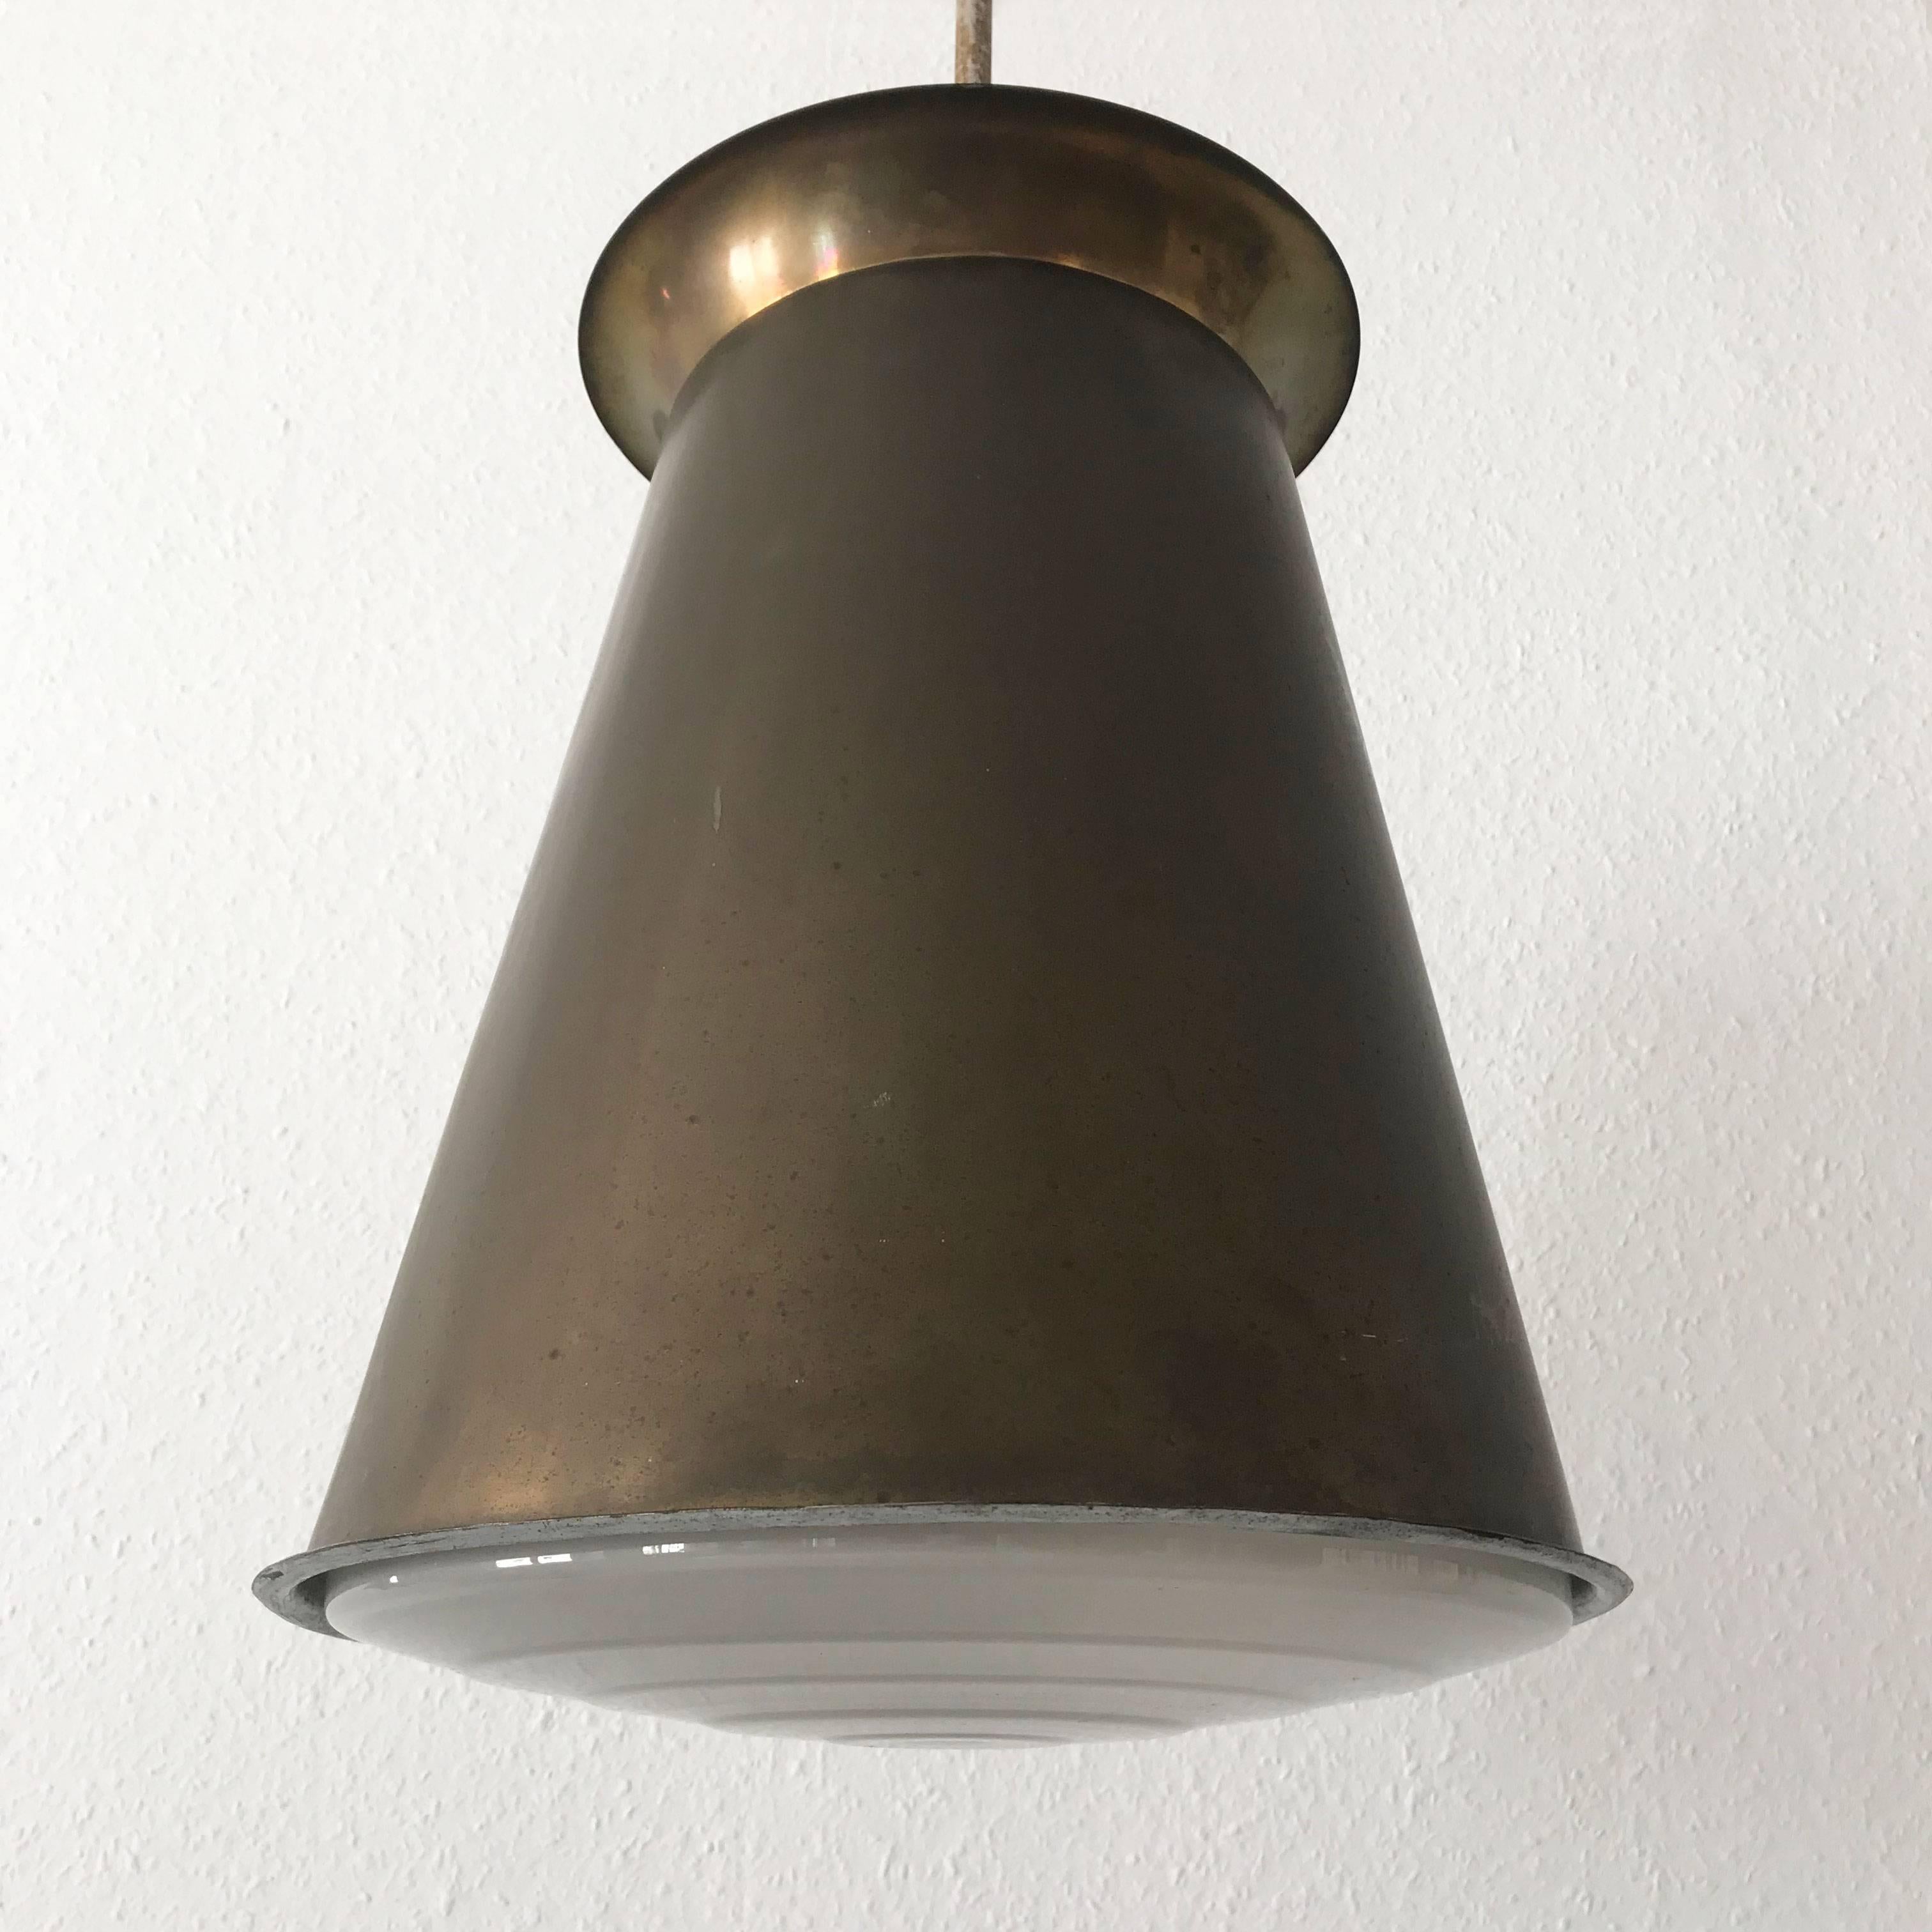 Exceptional Bauhaus Pendant Lamp by Adolf Meyer for Zeiss Ikon, 1930s, Germany For Sale 4